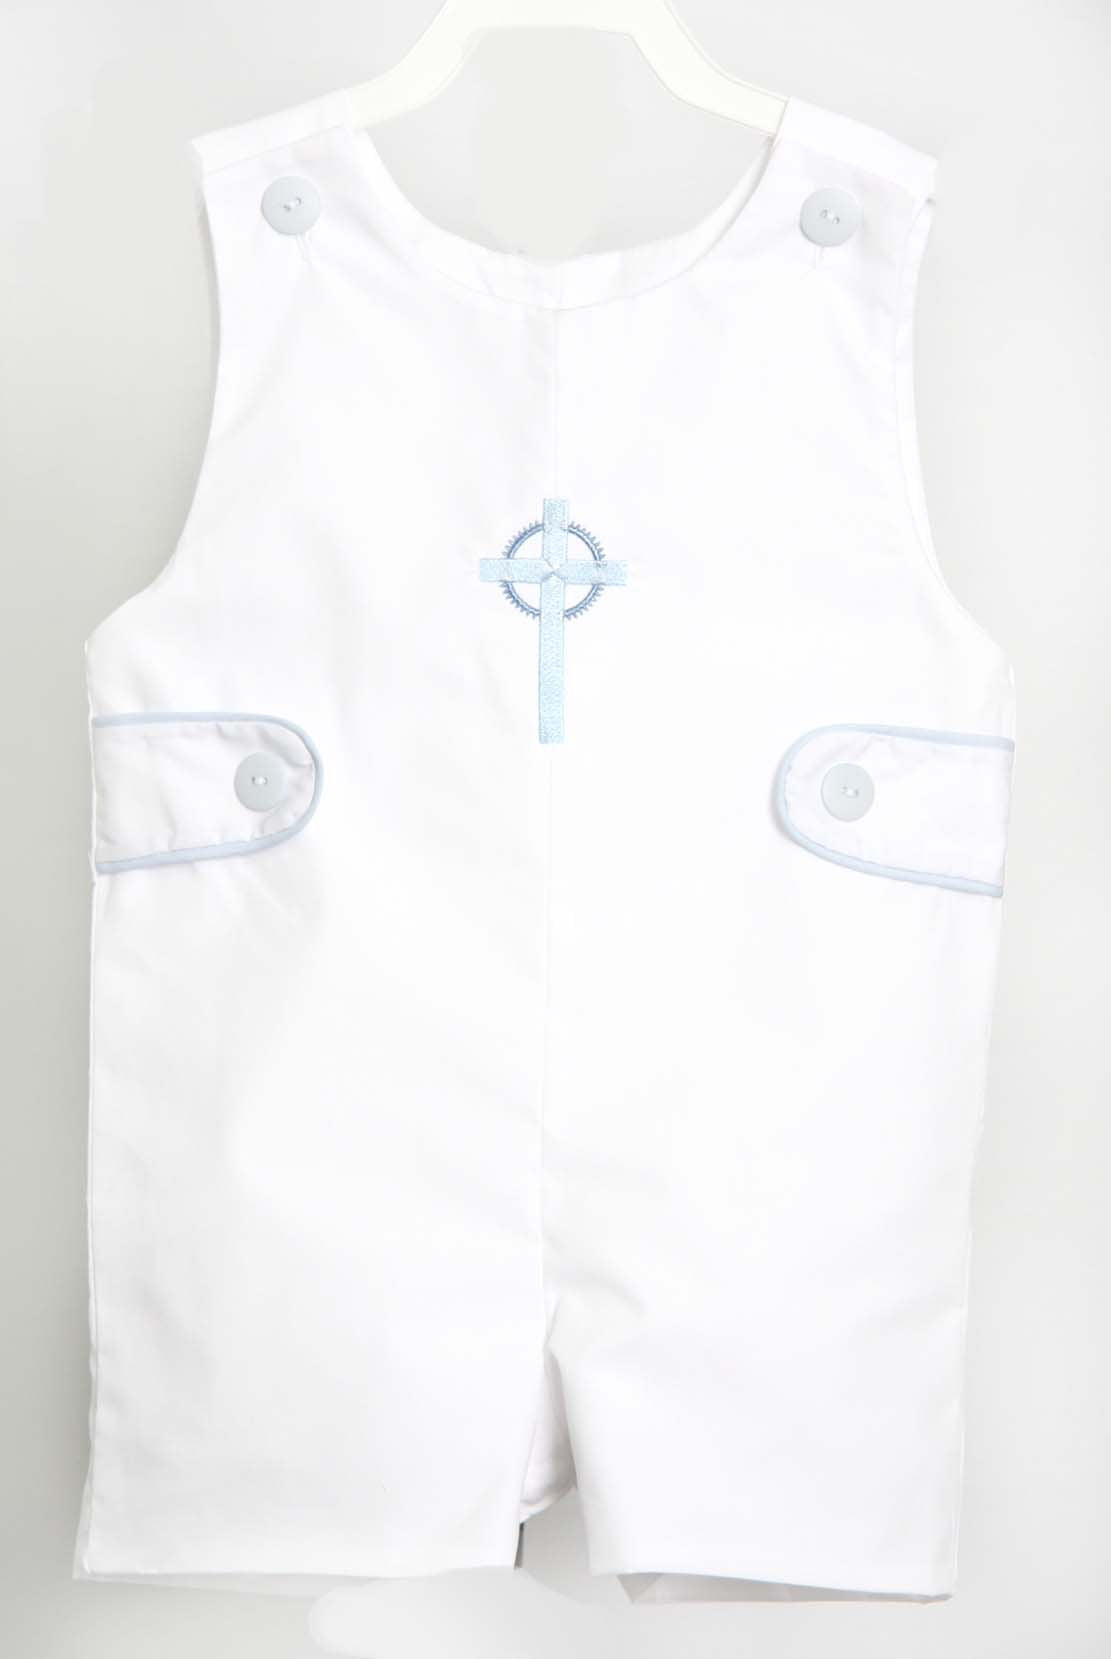 baptism outfit for baby boy